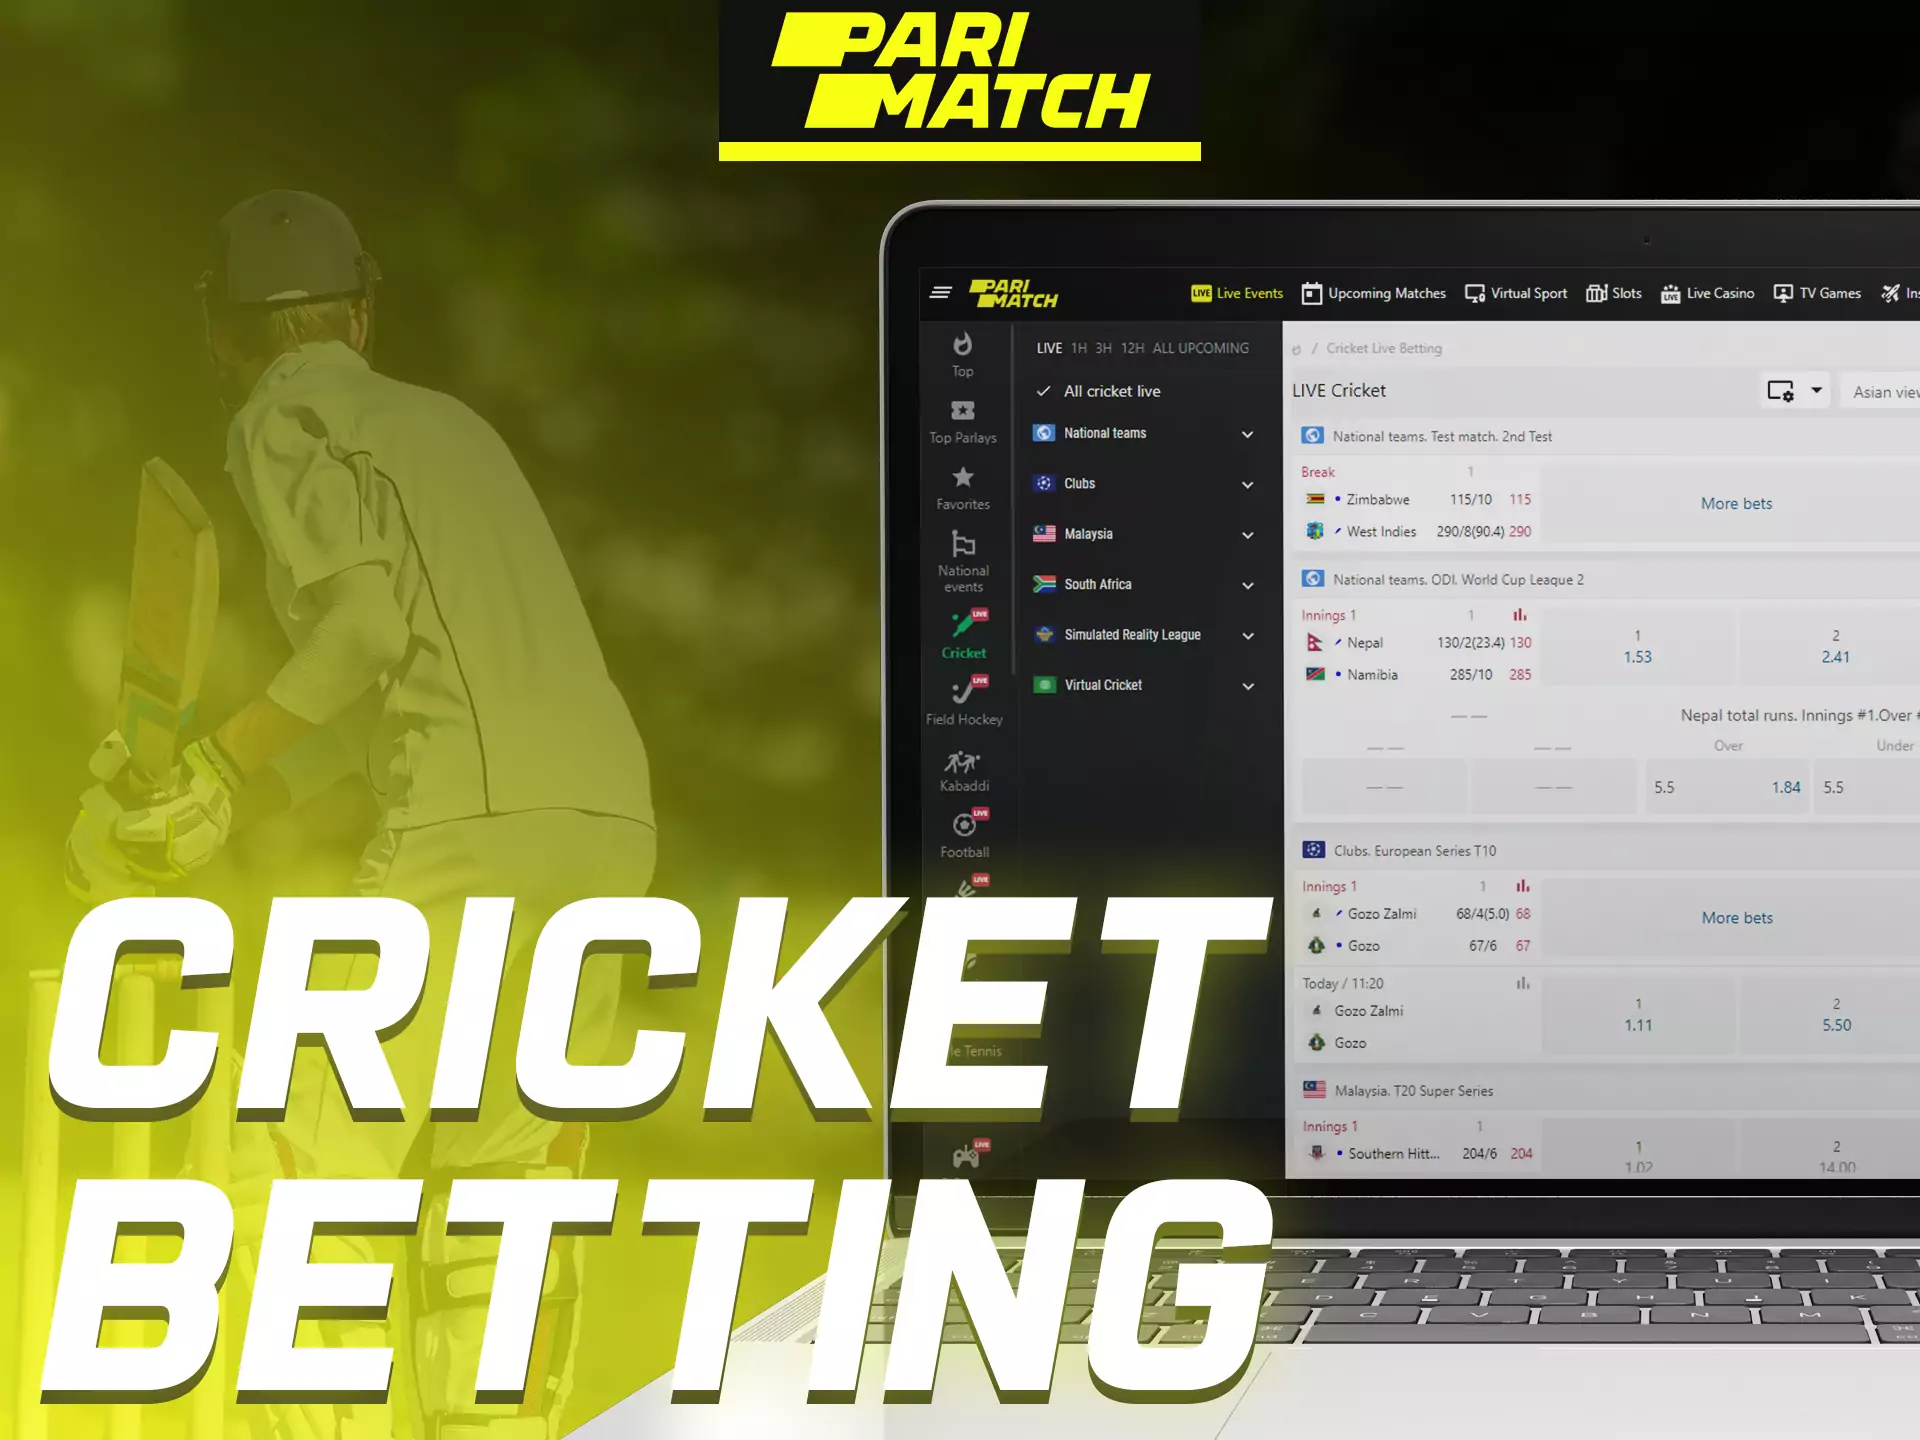 Bet on best Indian cricket teams at Parimatch.